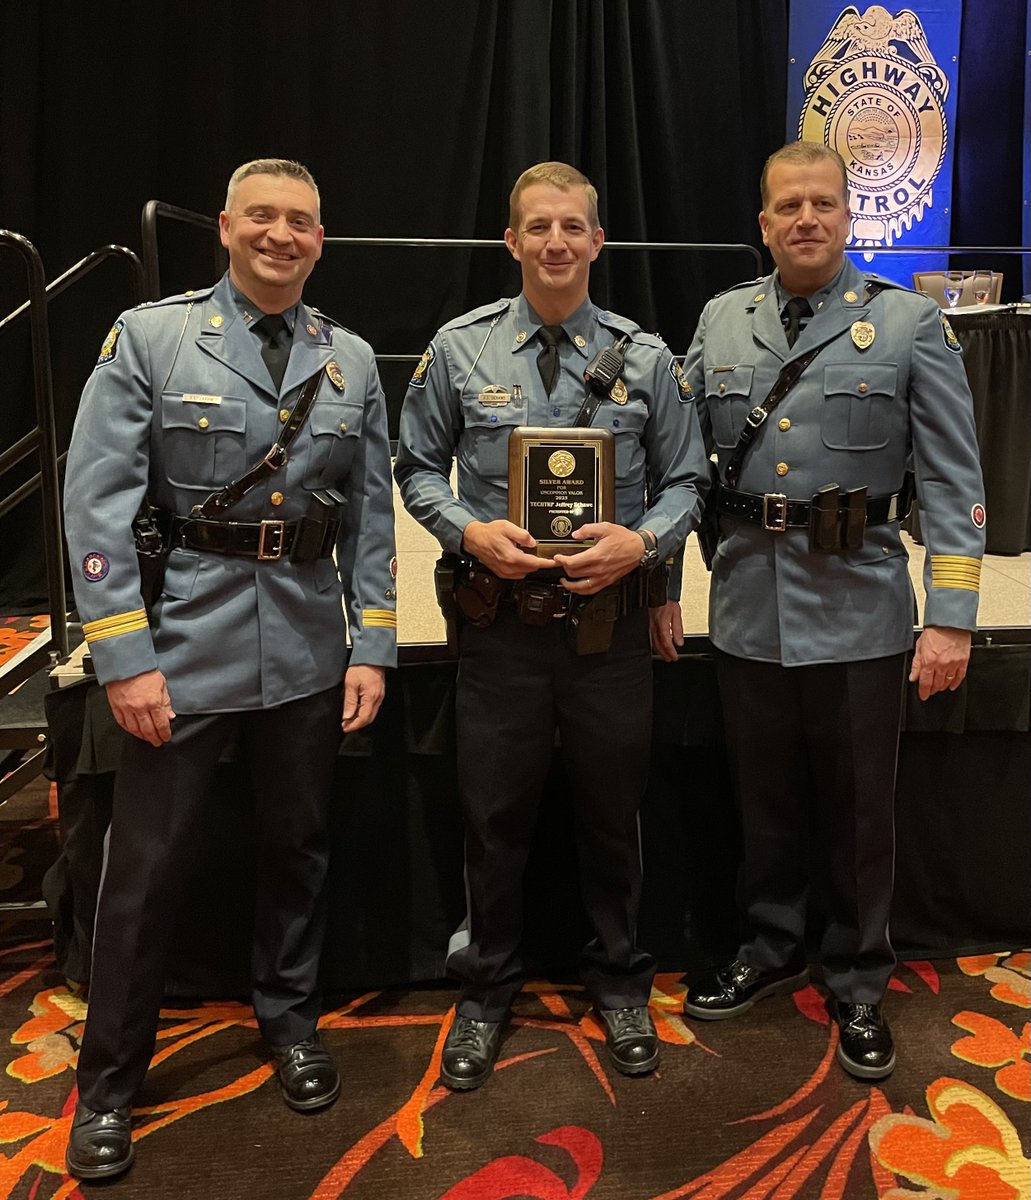 The Kansas Association of Chiefs of Police held their annual awards ceremony. Trooper Schawe was presented with the Silver Award, recognizing extraordinary action which directly contributed to the significant prolonging or actual saving of a life. #ServiceCourtesyProtection